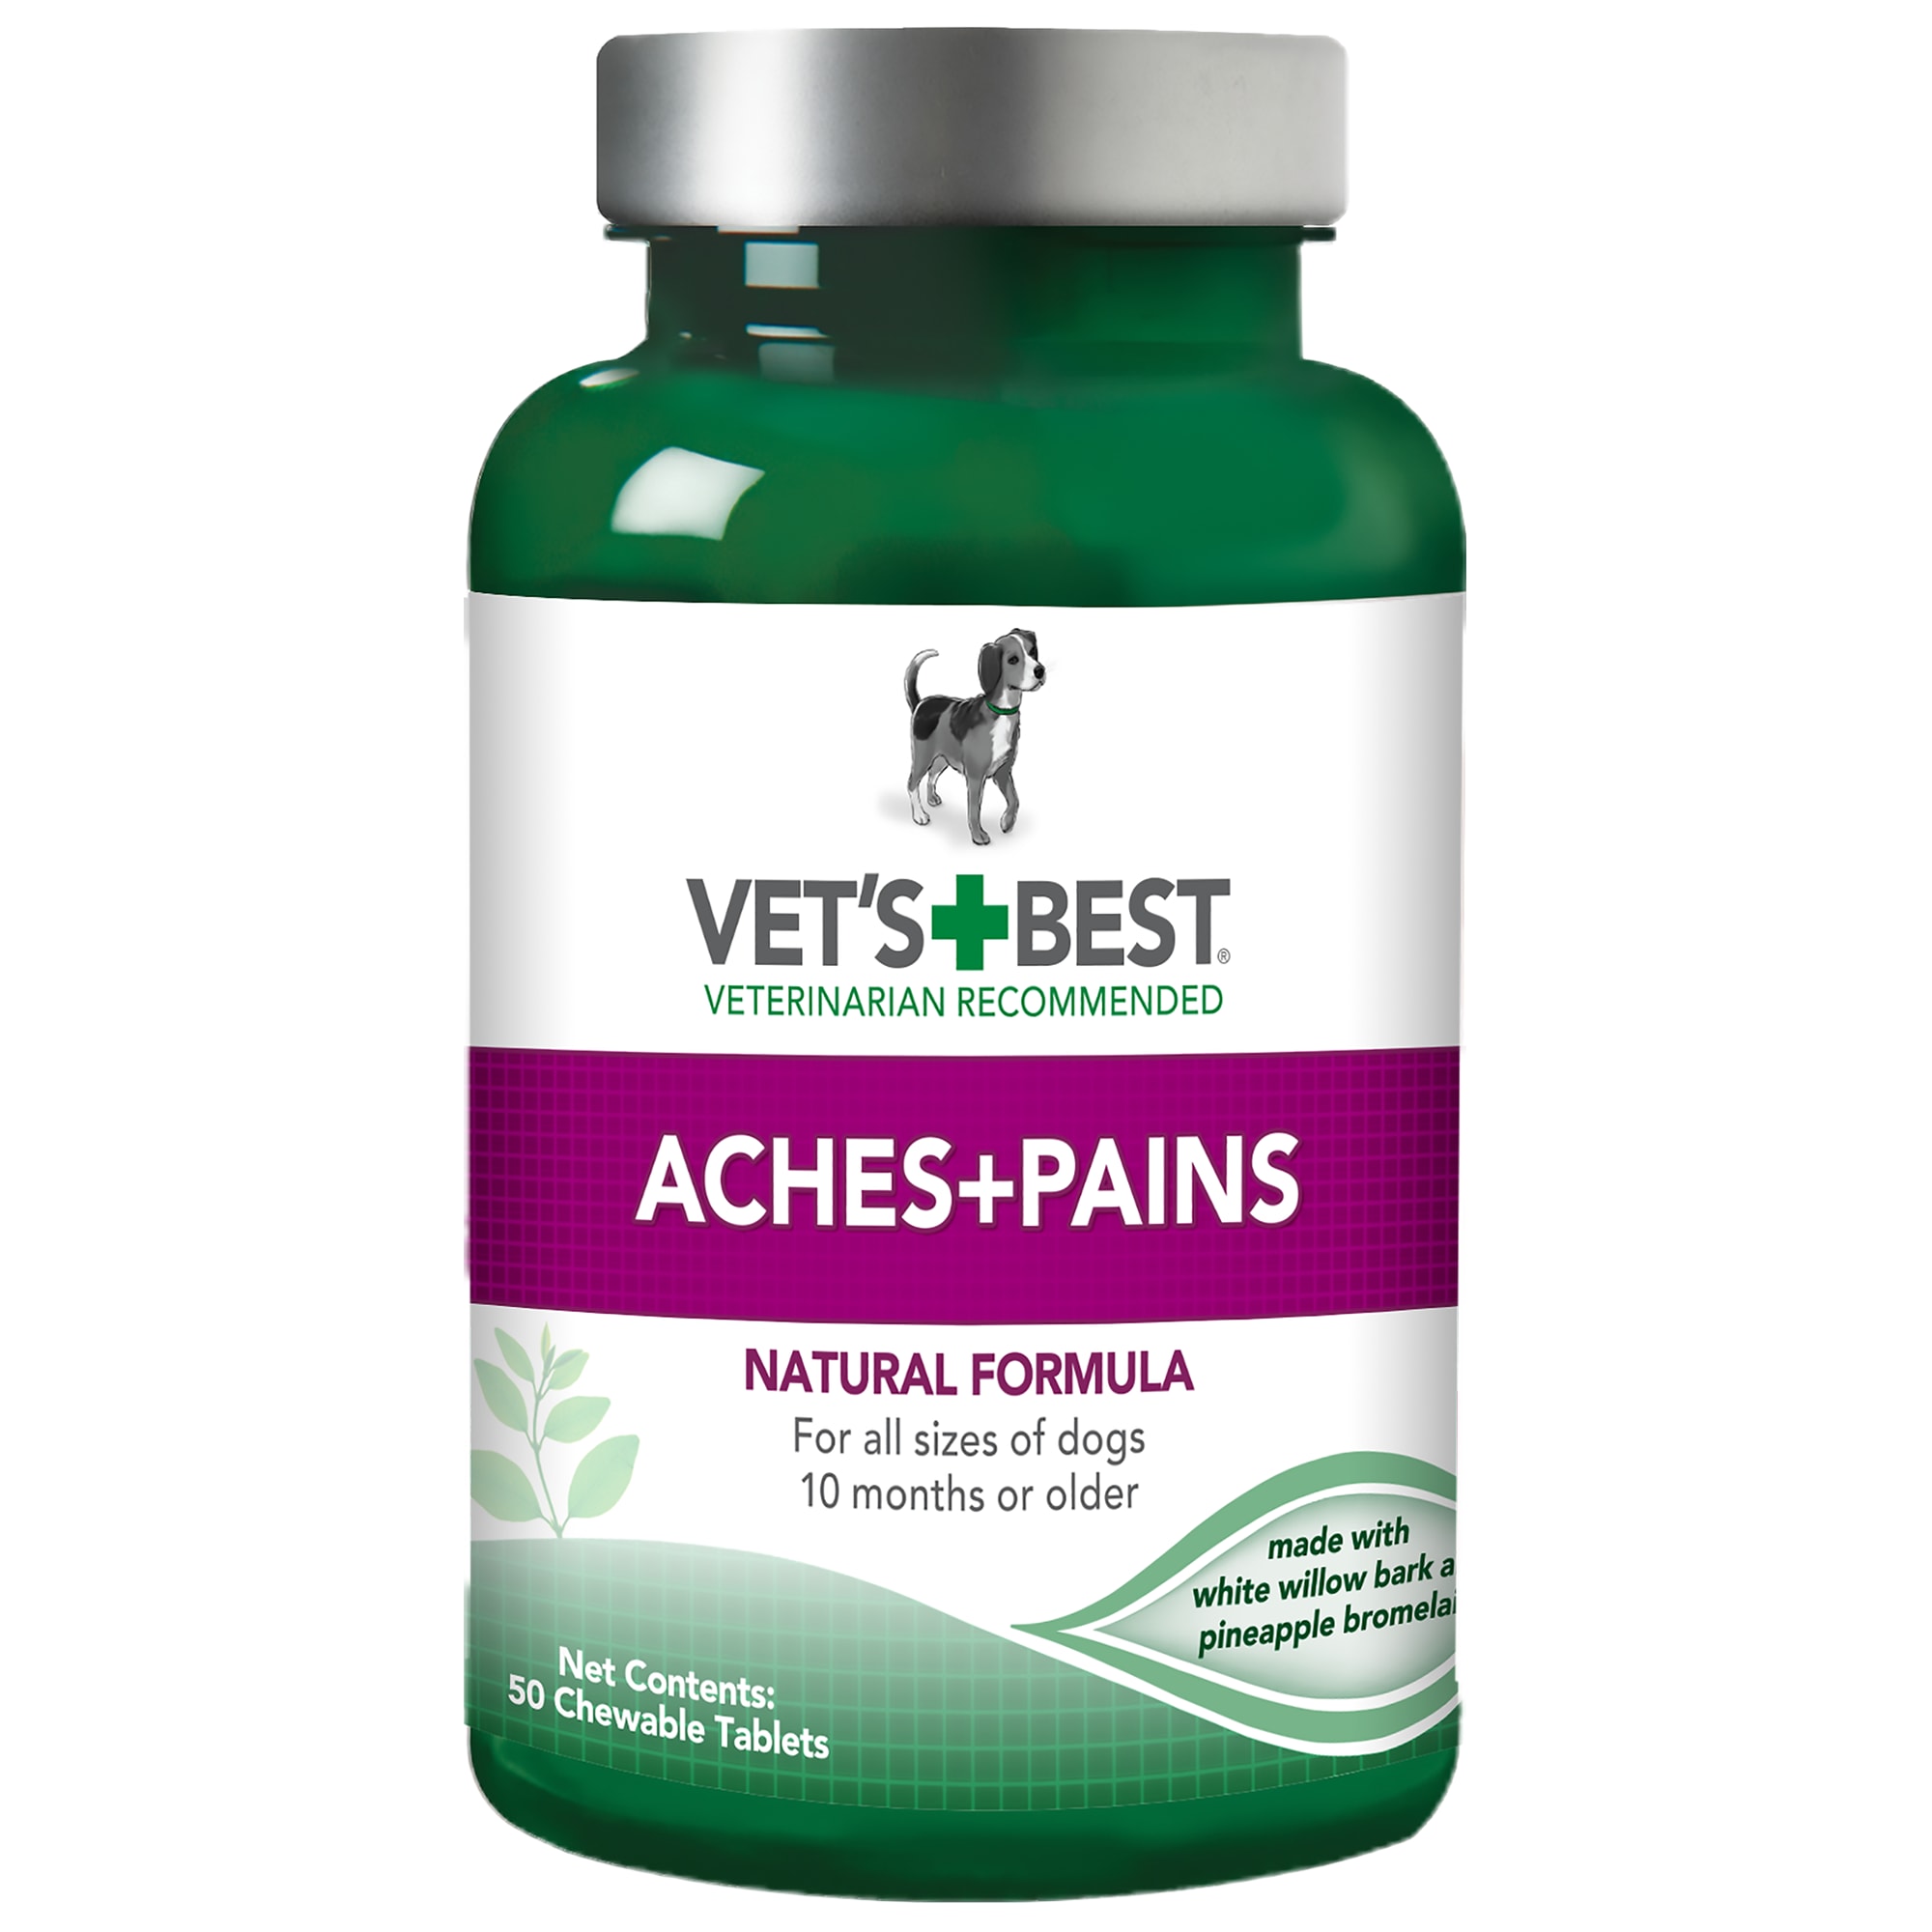 over the counter joint medicine for dogs